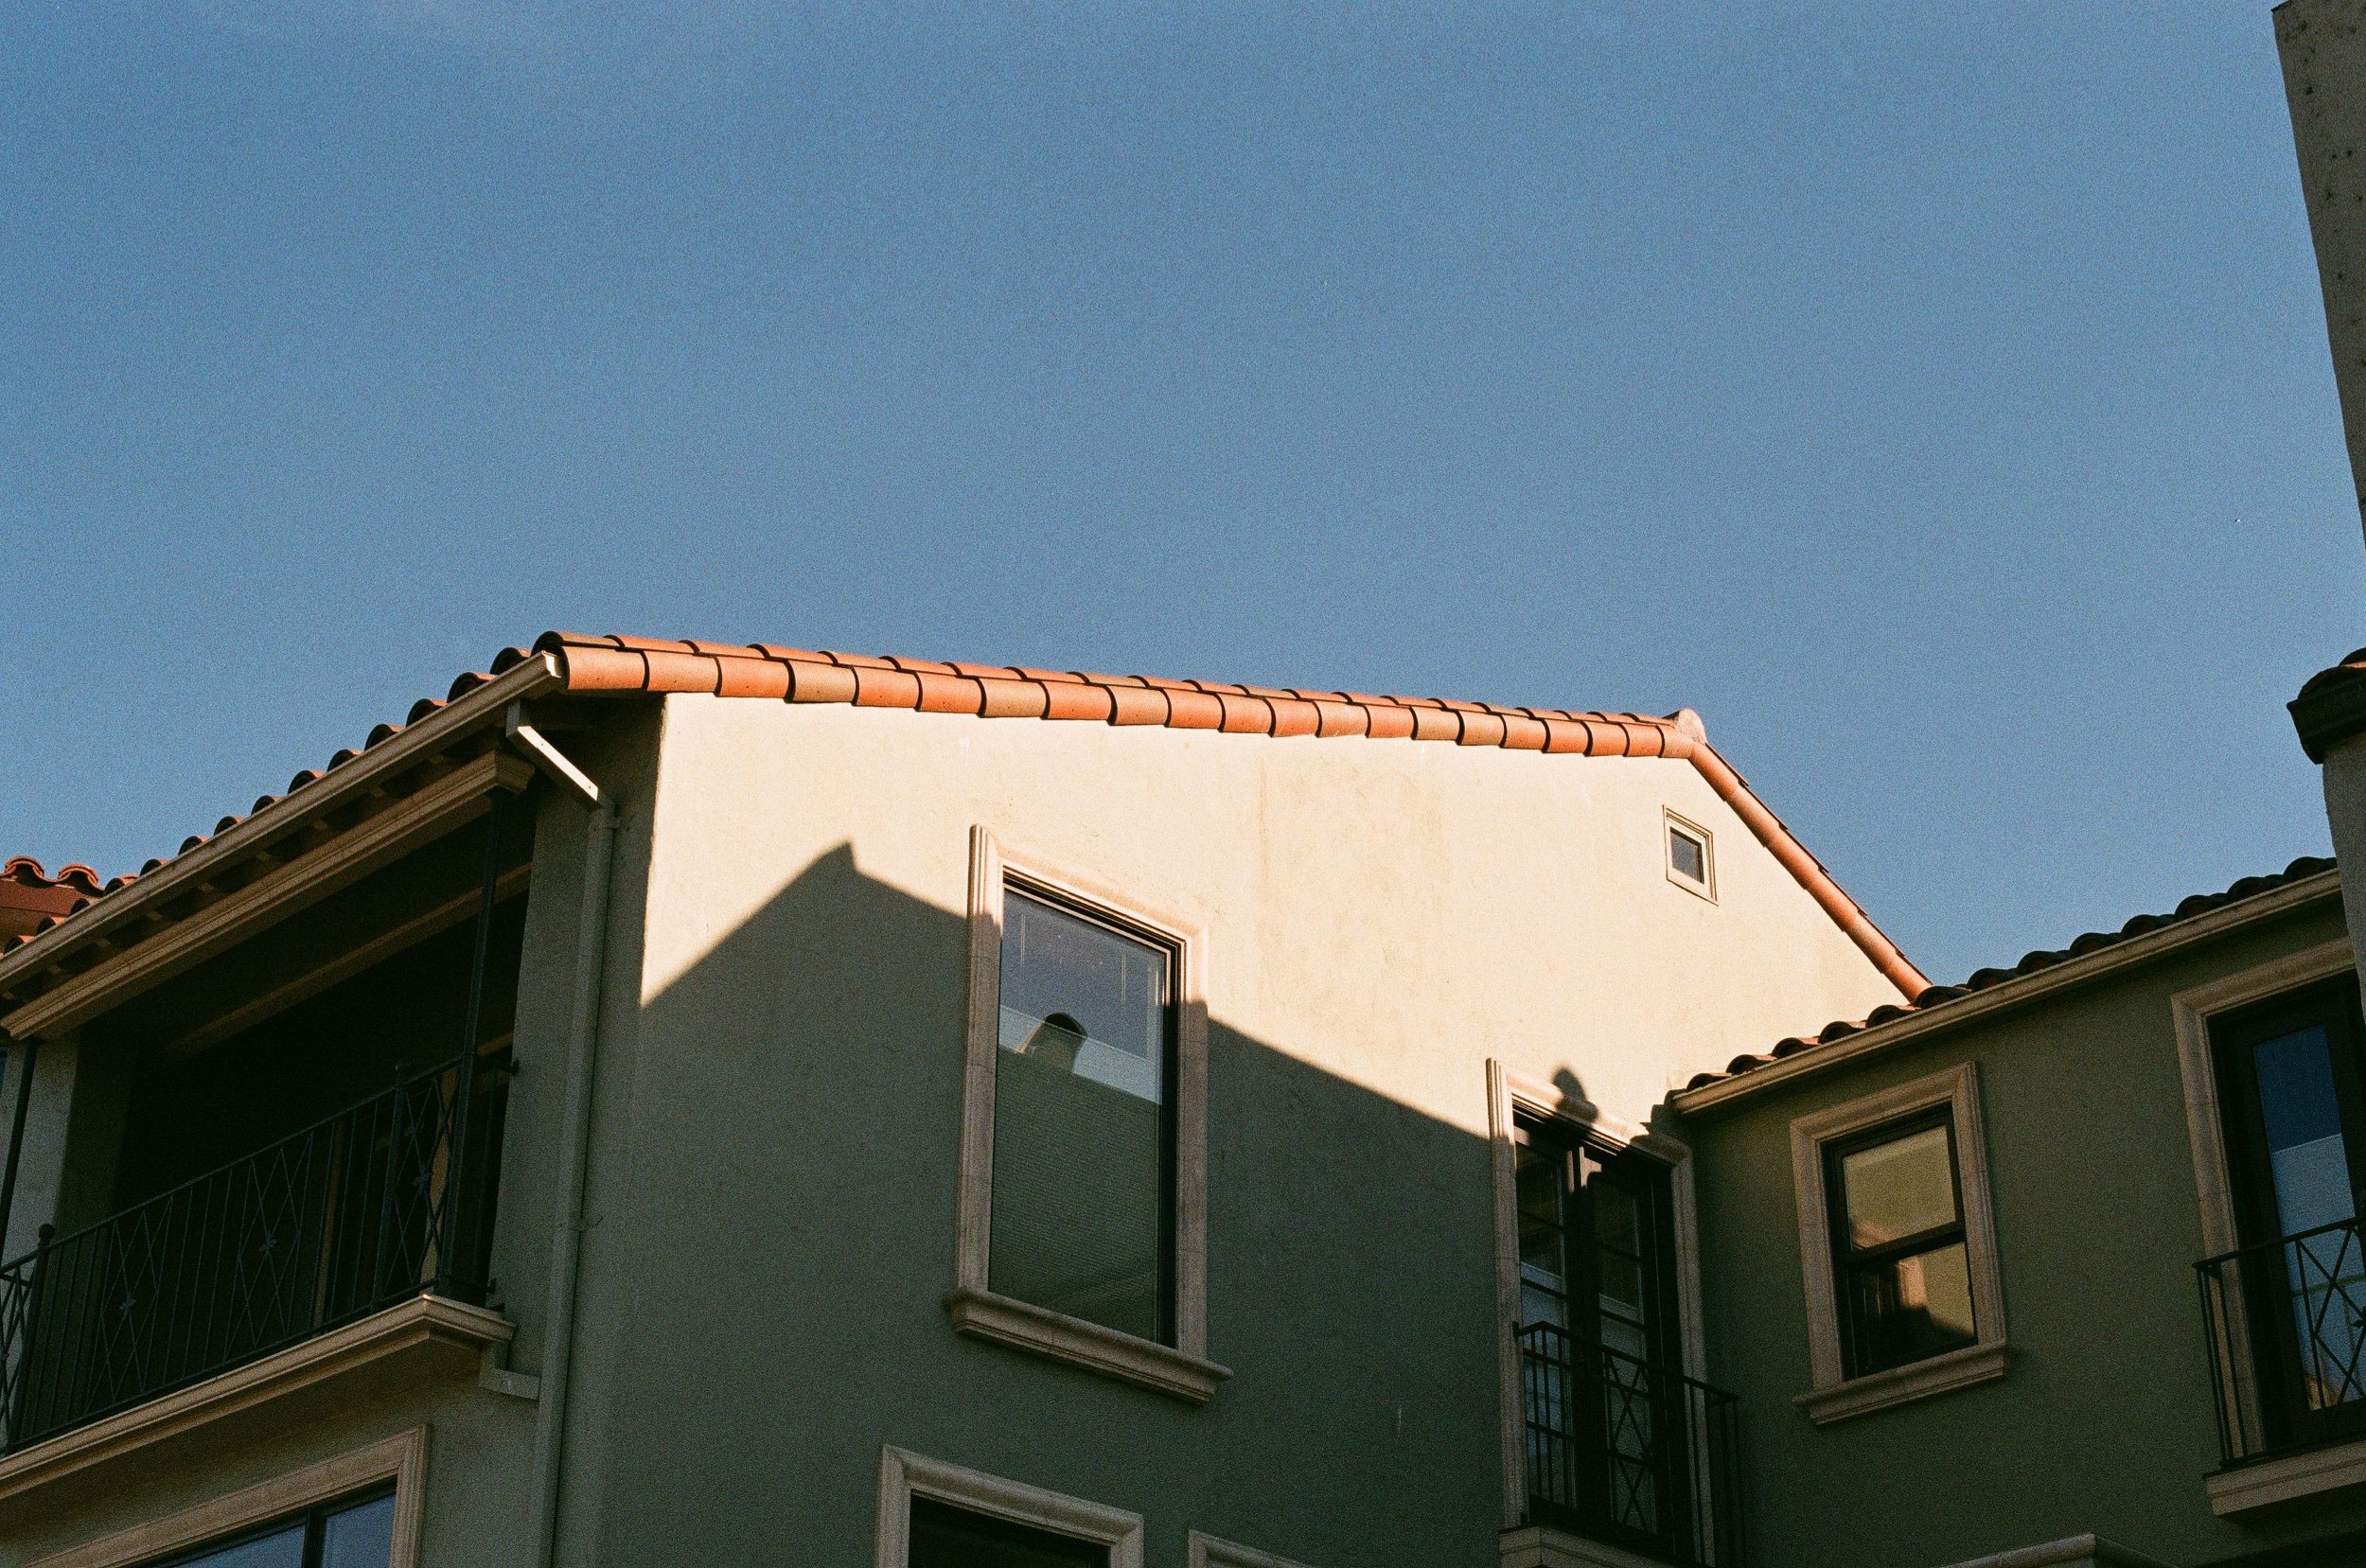  Shot with Canon AE-1 on Fuji Color 200 